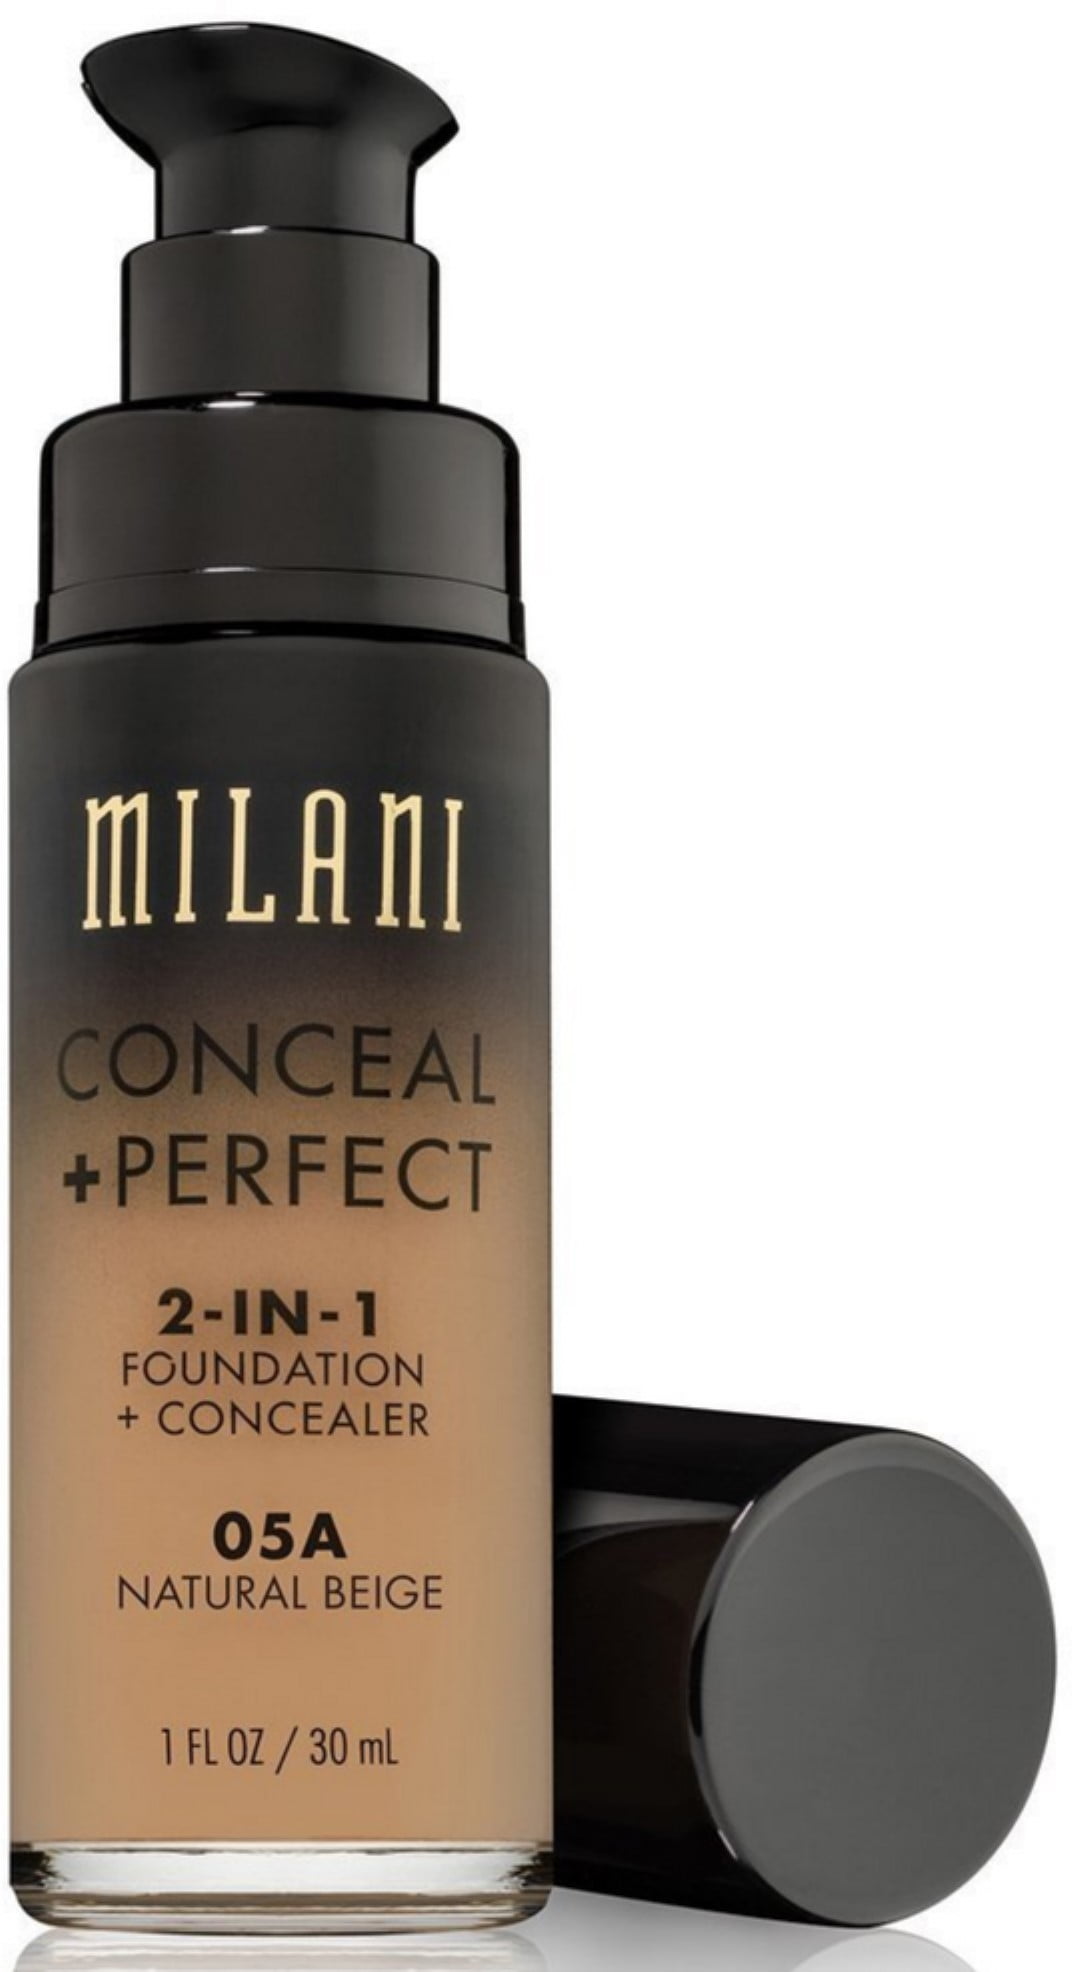 Milani Conceal + Perfect 2-in-1 Foundation + Concealer, Natural Beige